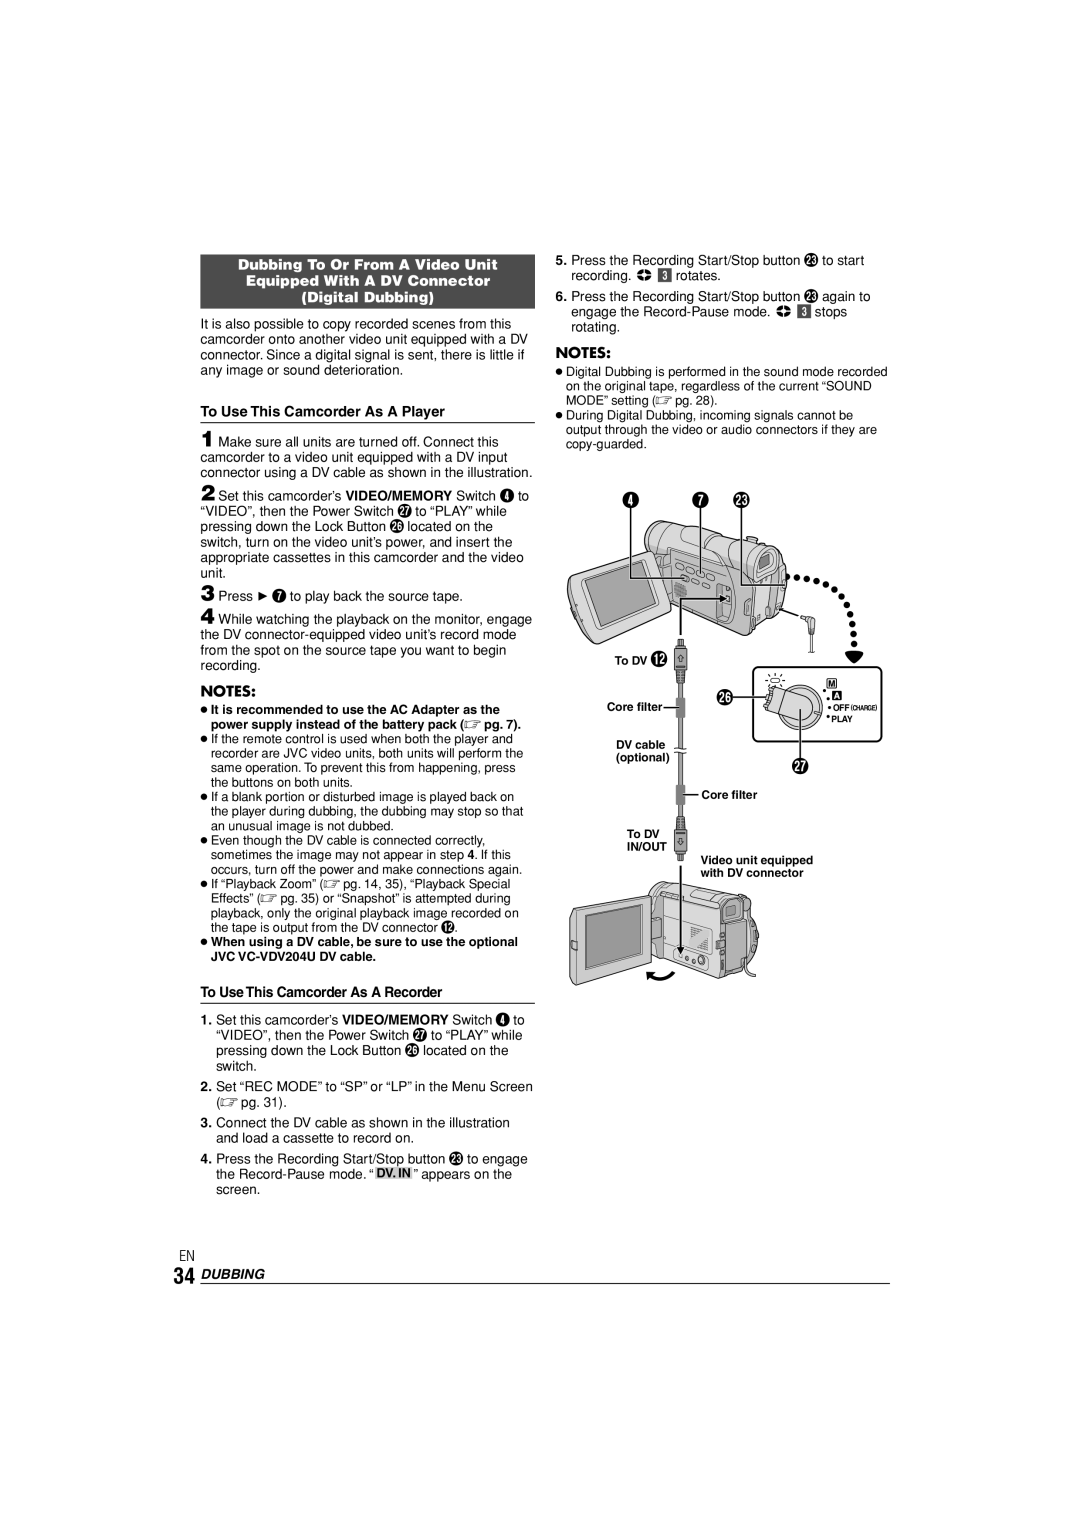 JVC GR-D90 GR-D70 instruction manual 4 7 e, Dubbing To Or From A Video Unit Equipped With A DV Connector, Digital Dubbing 